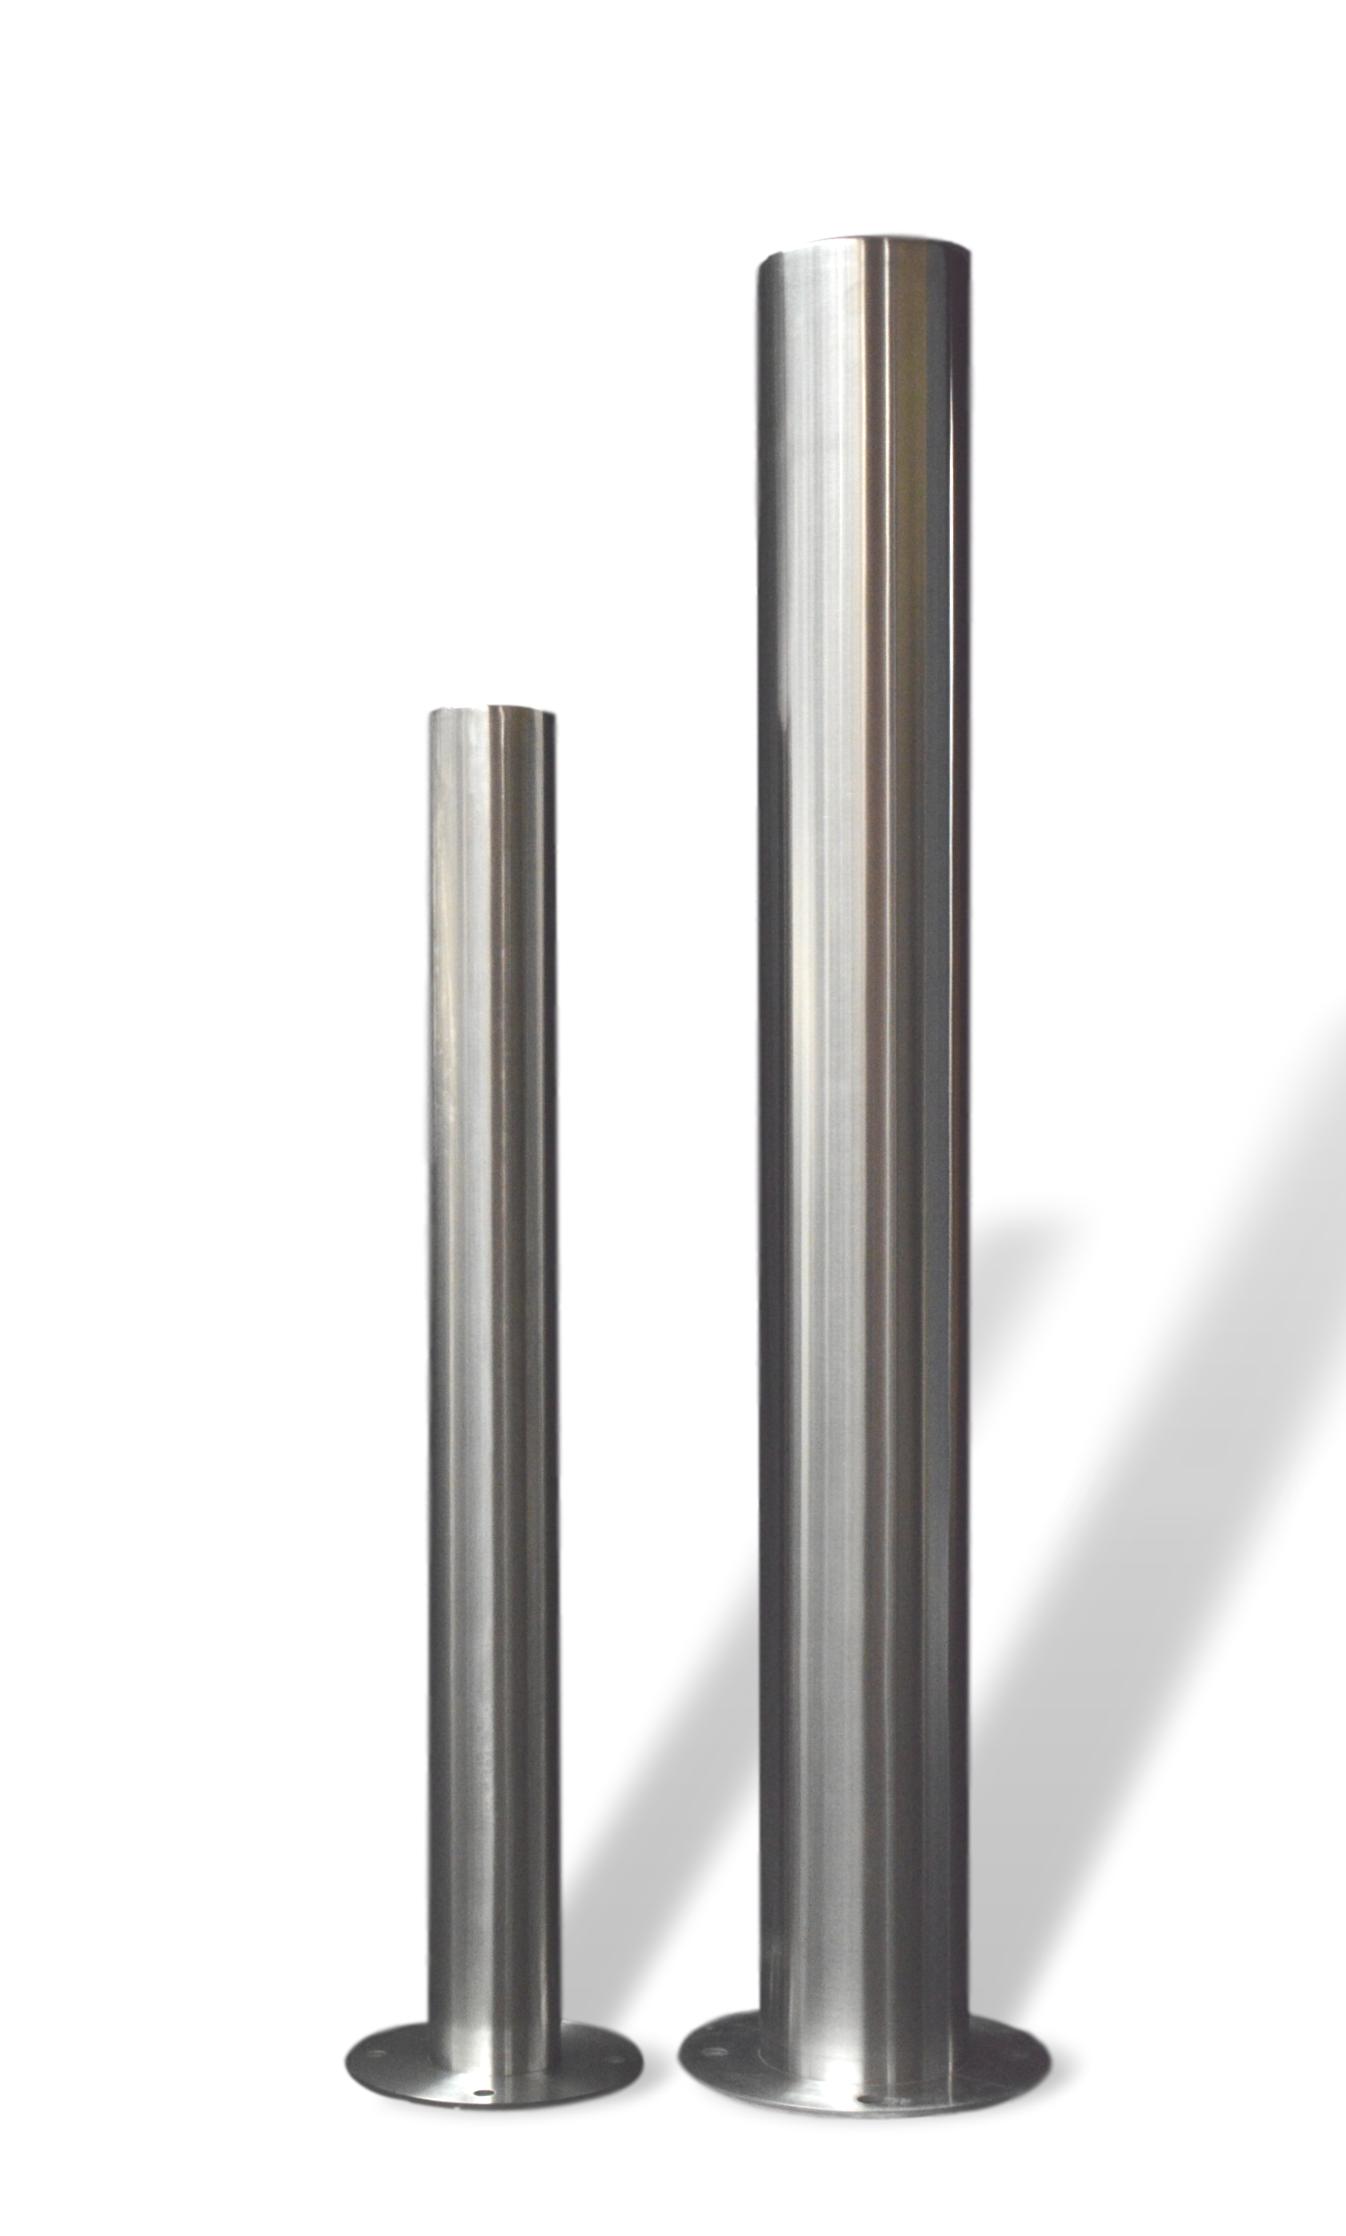 Stainless steel bollards, one large and one small next to each other